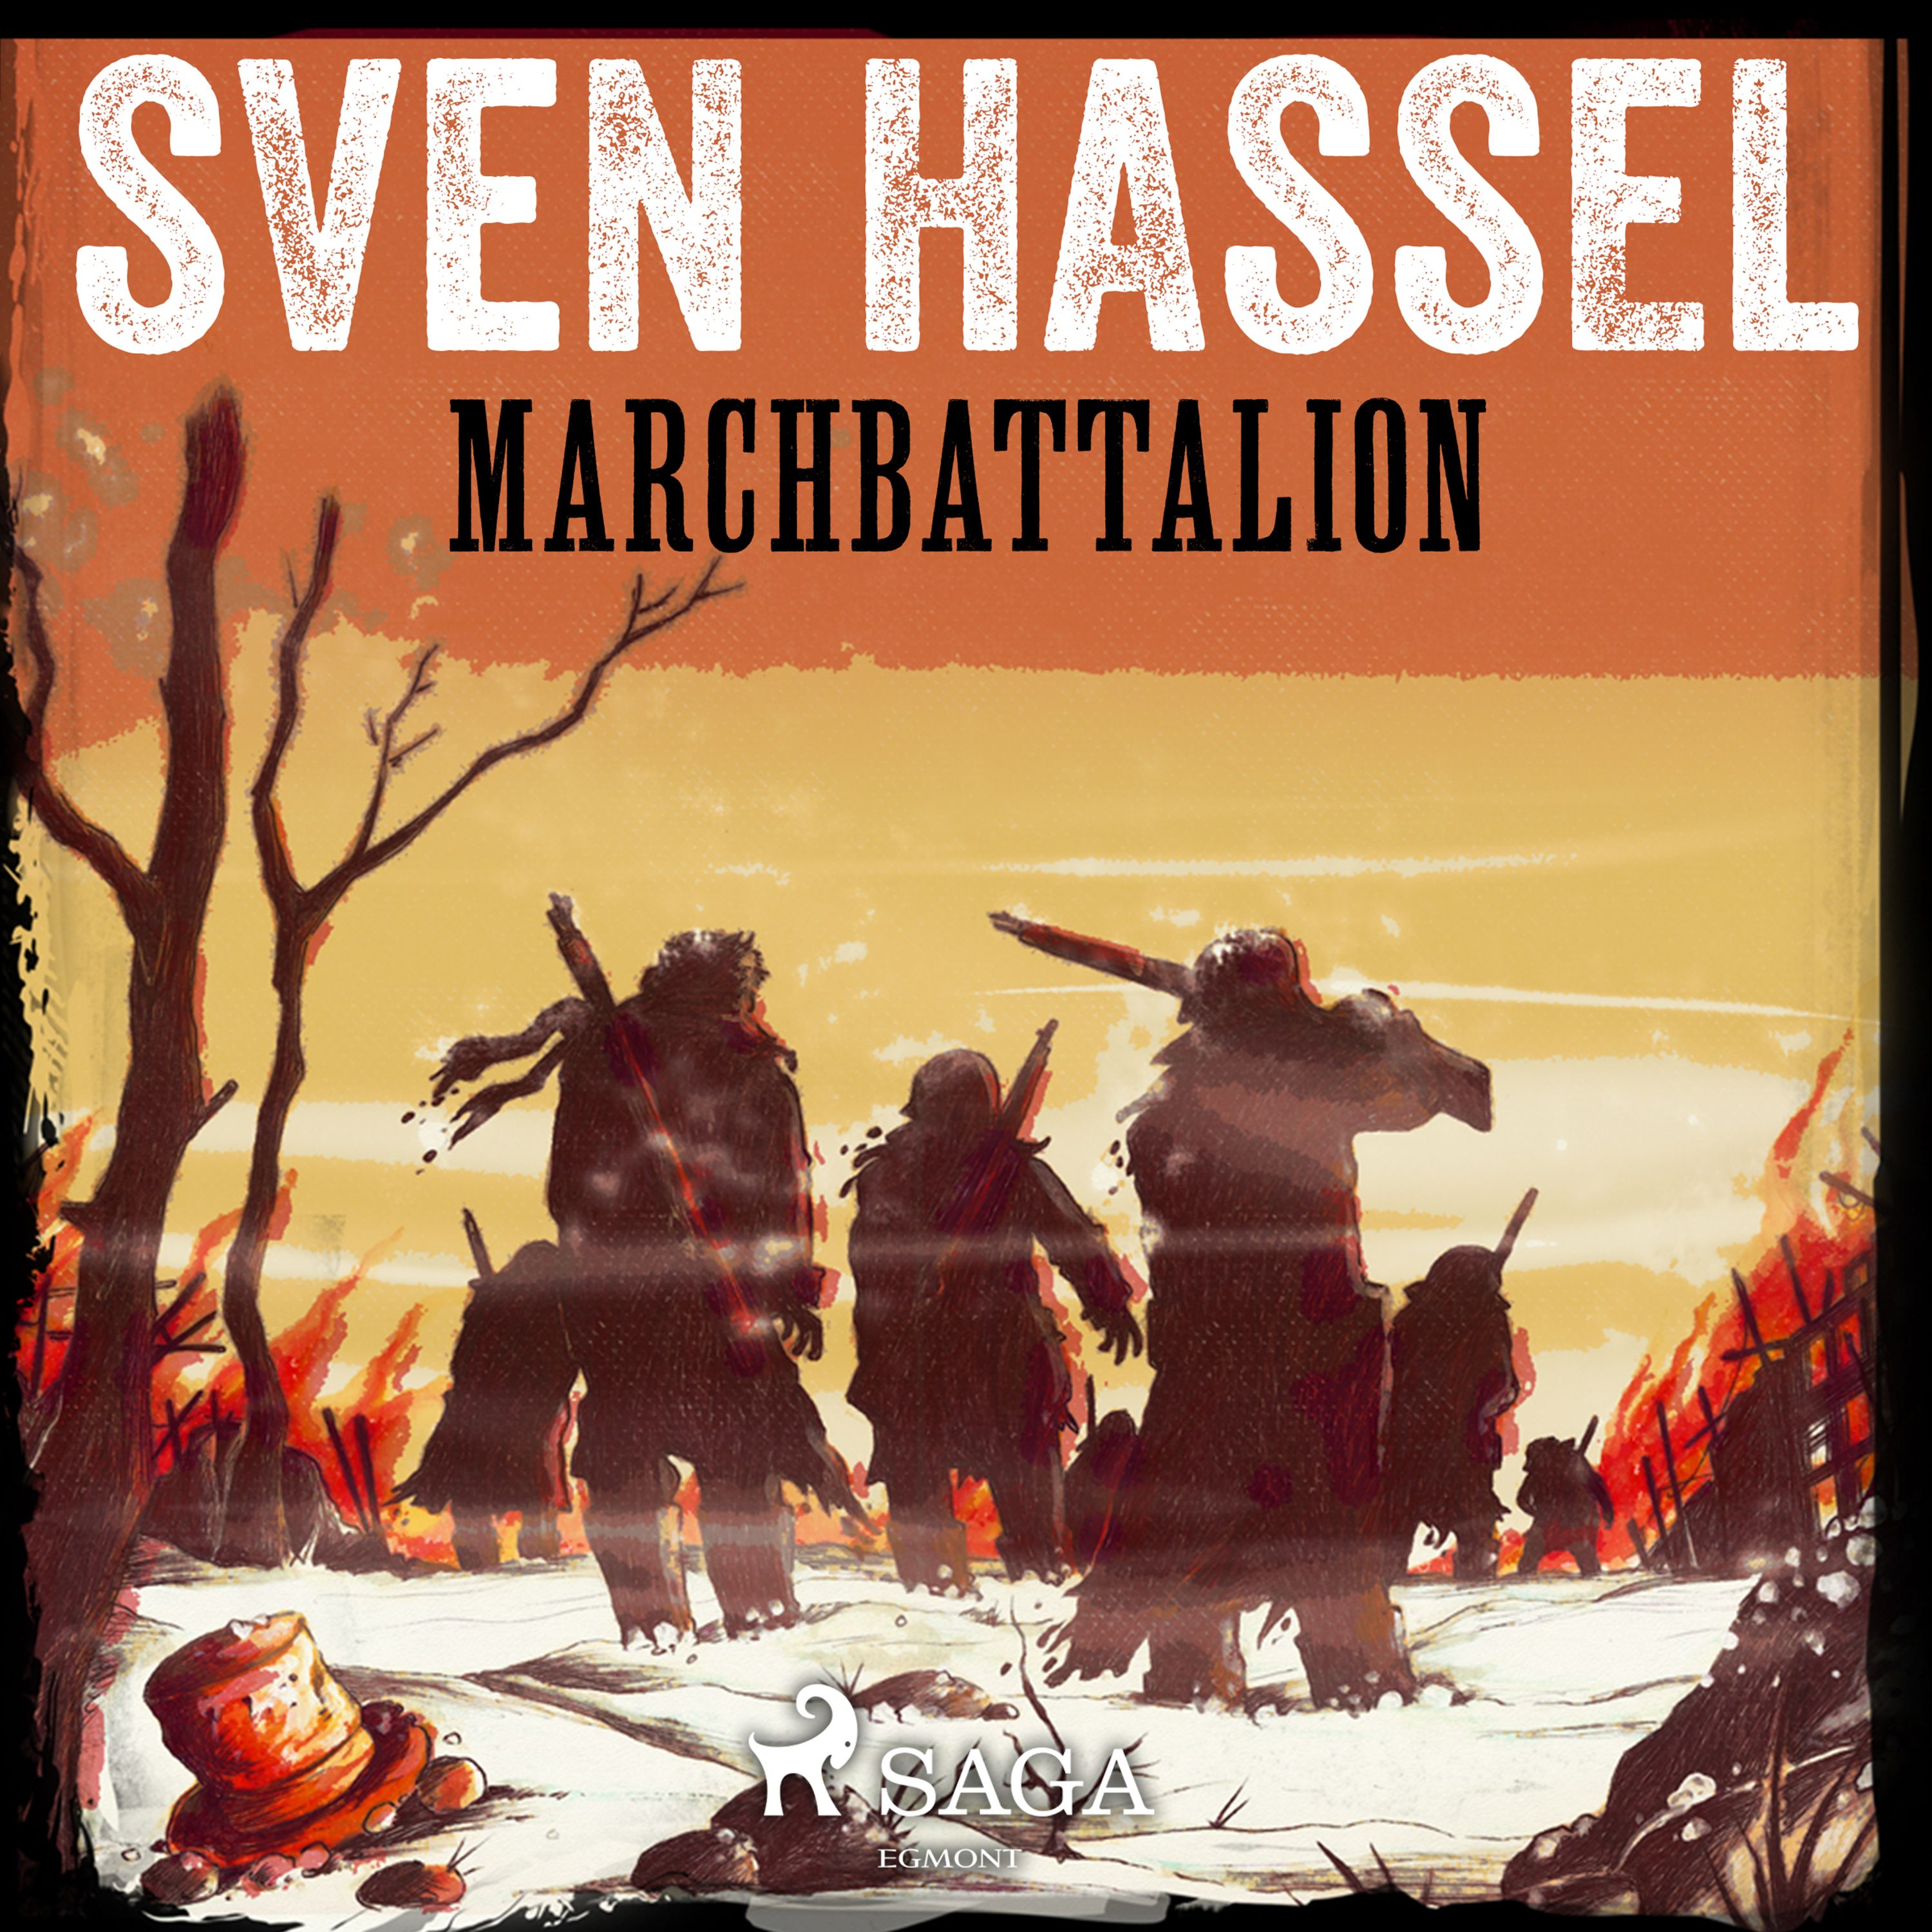 Marchbattalion, audiobook by Sven Hassel